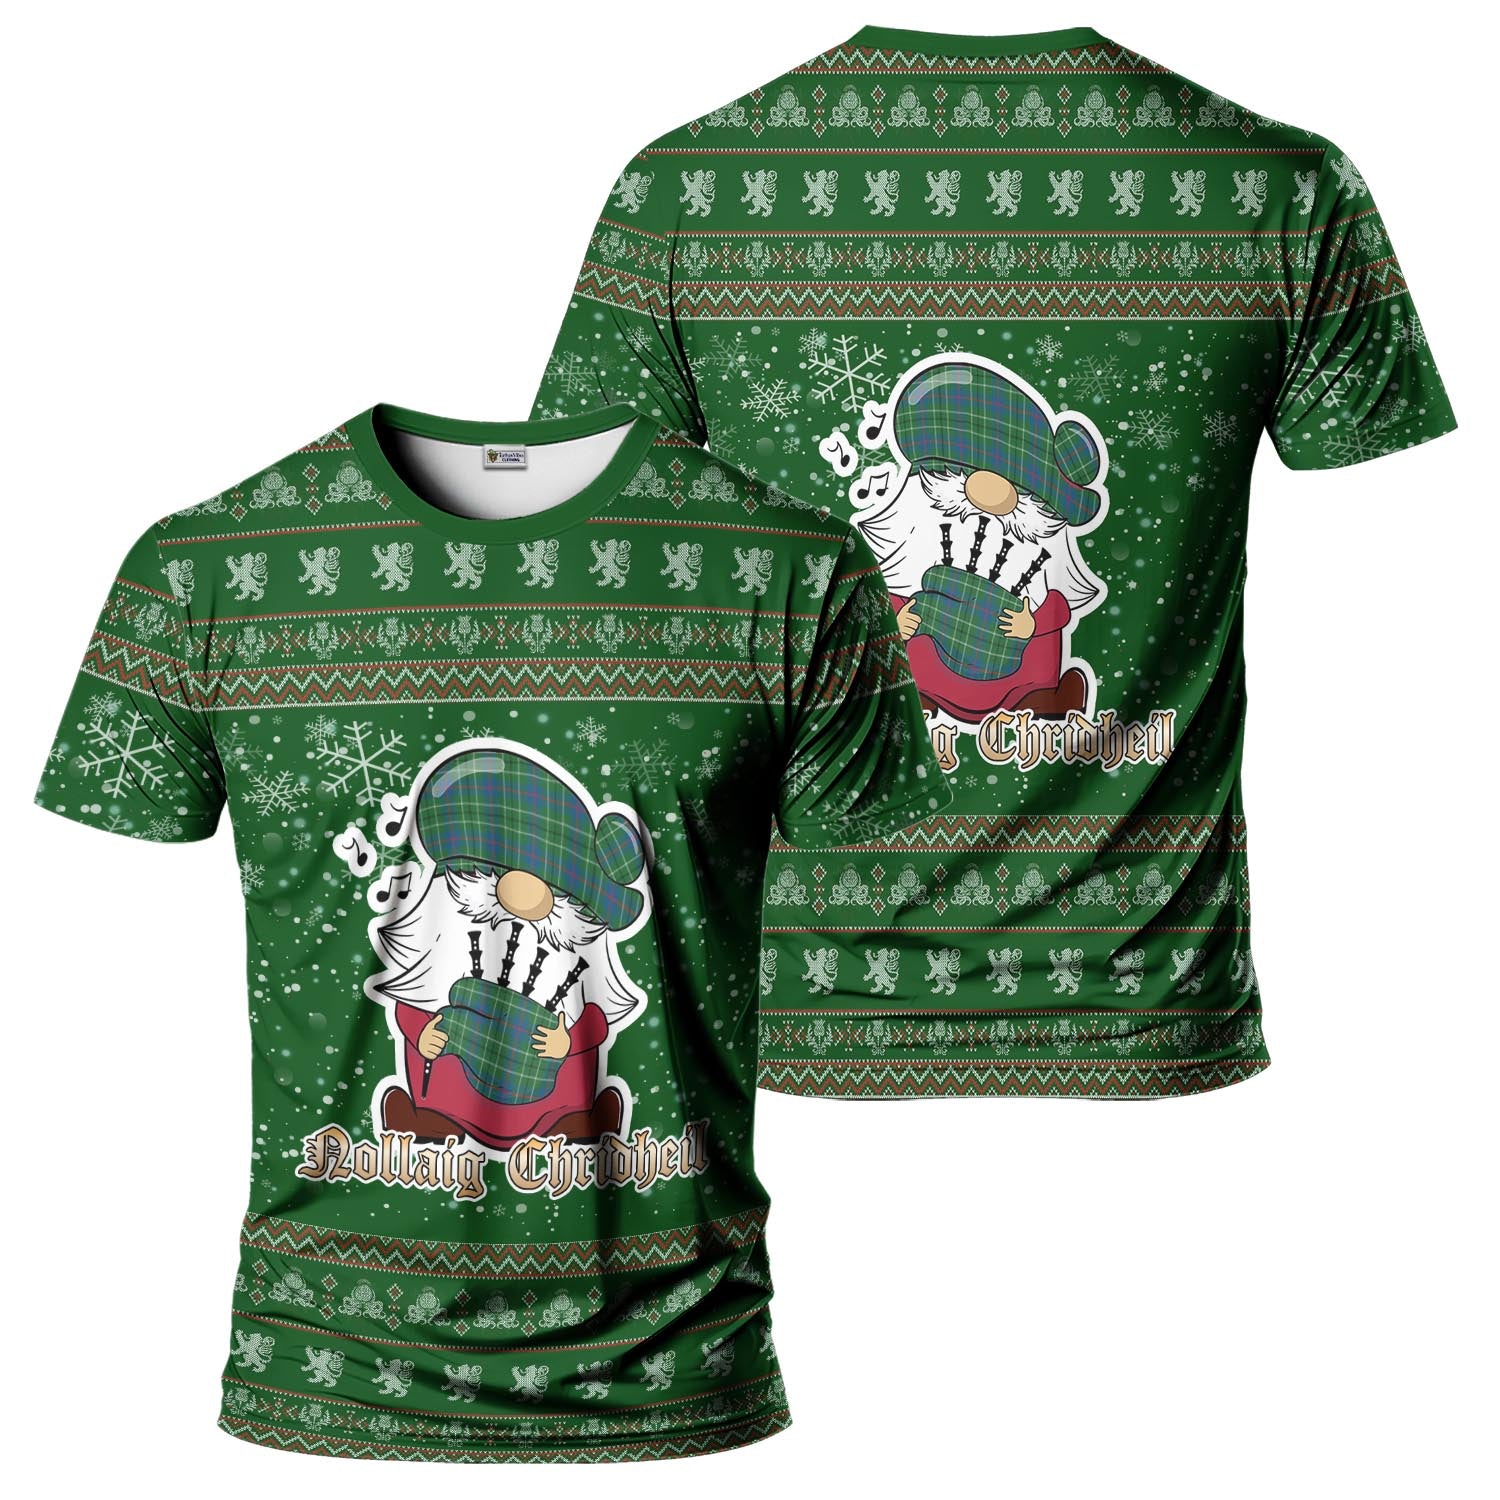 Duncan Ancient Clan Christmas Family T-Shirt with Funny Gnome Playing Bagpipes Men's Shirt Green - Tartanvibesclothing